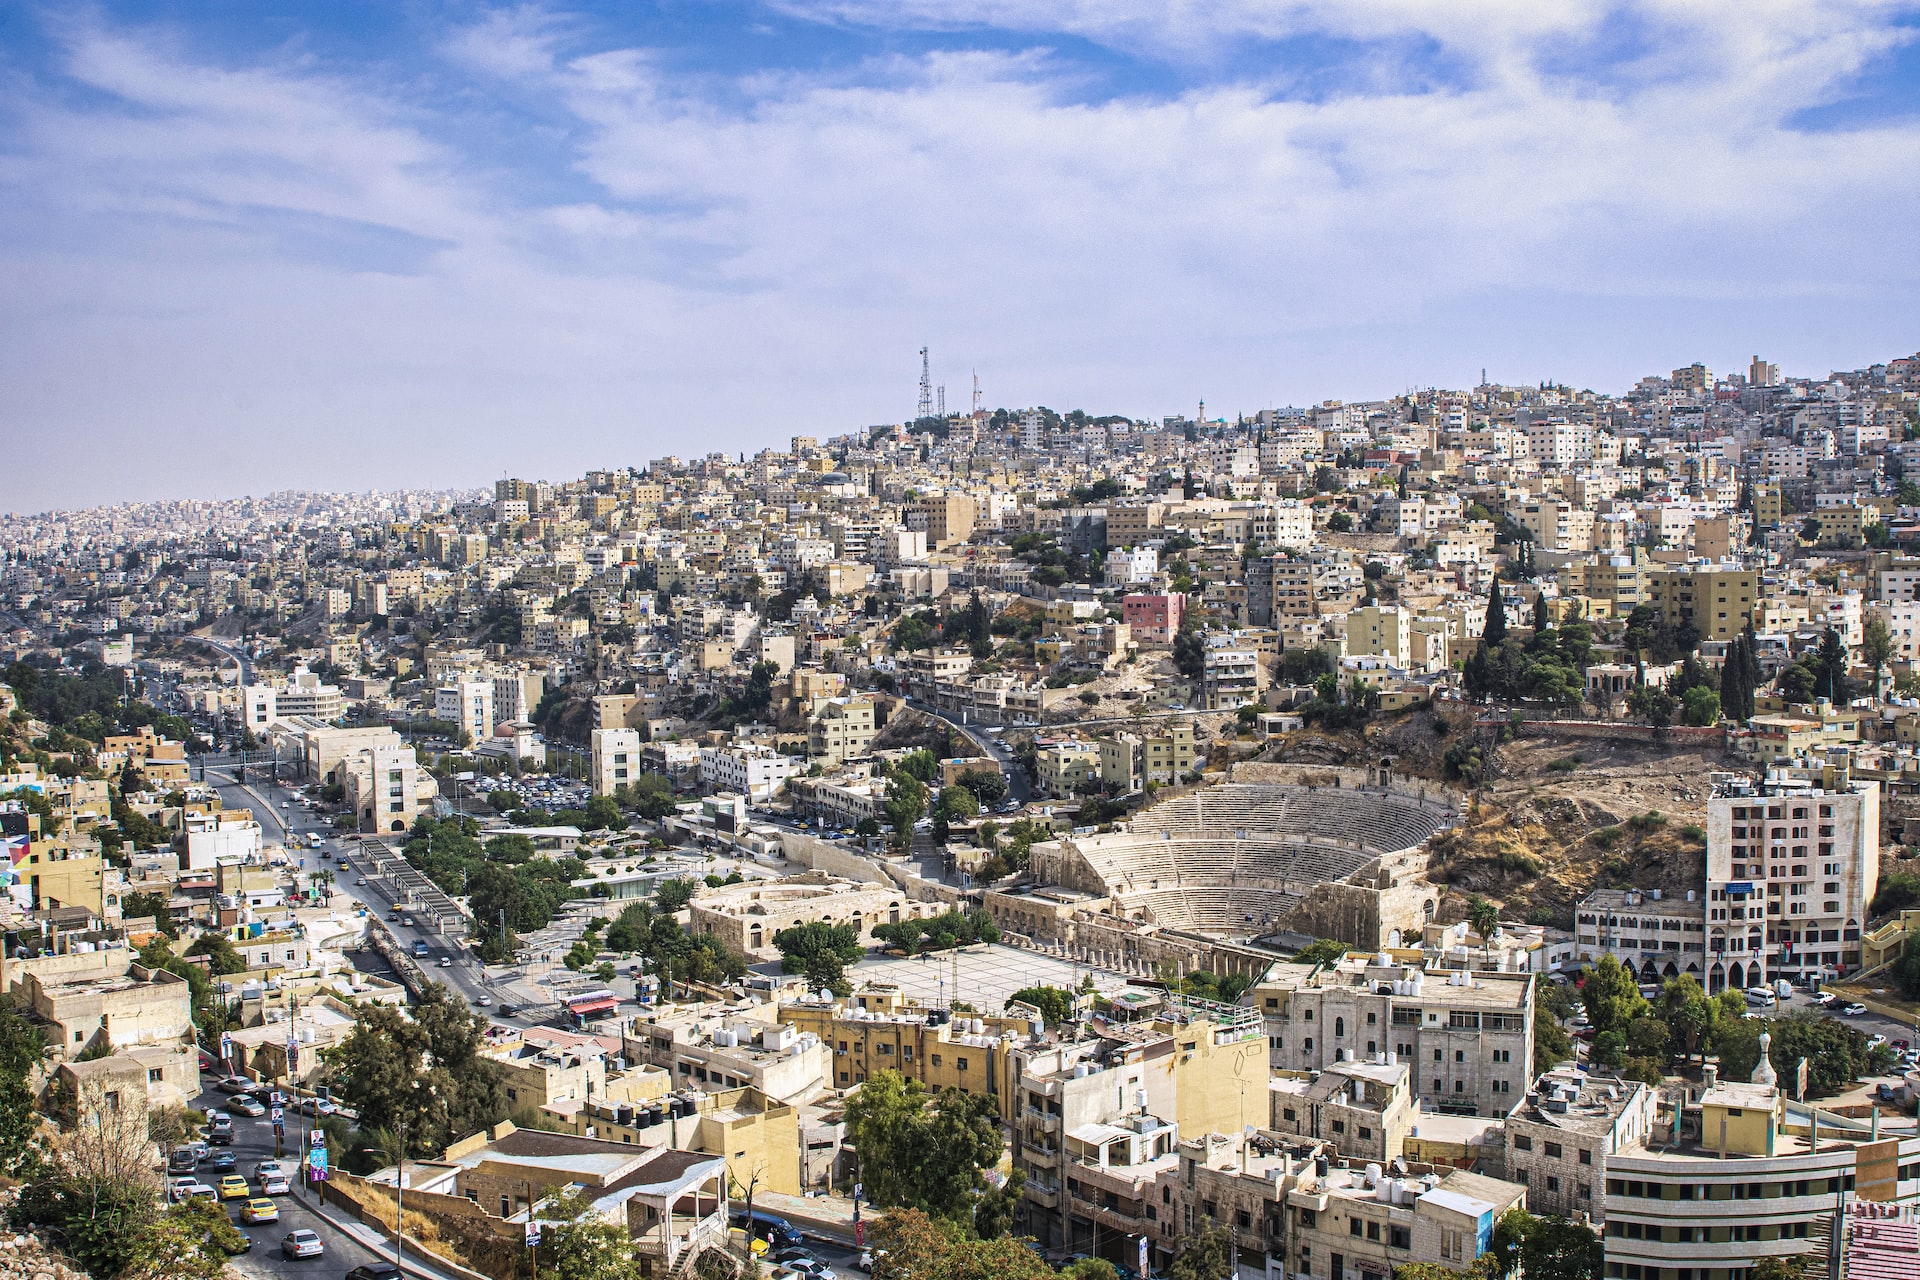 Day 1: Arrival to Amman